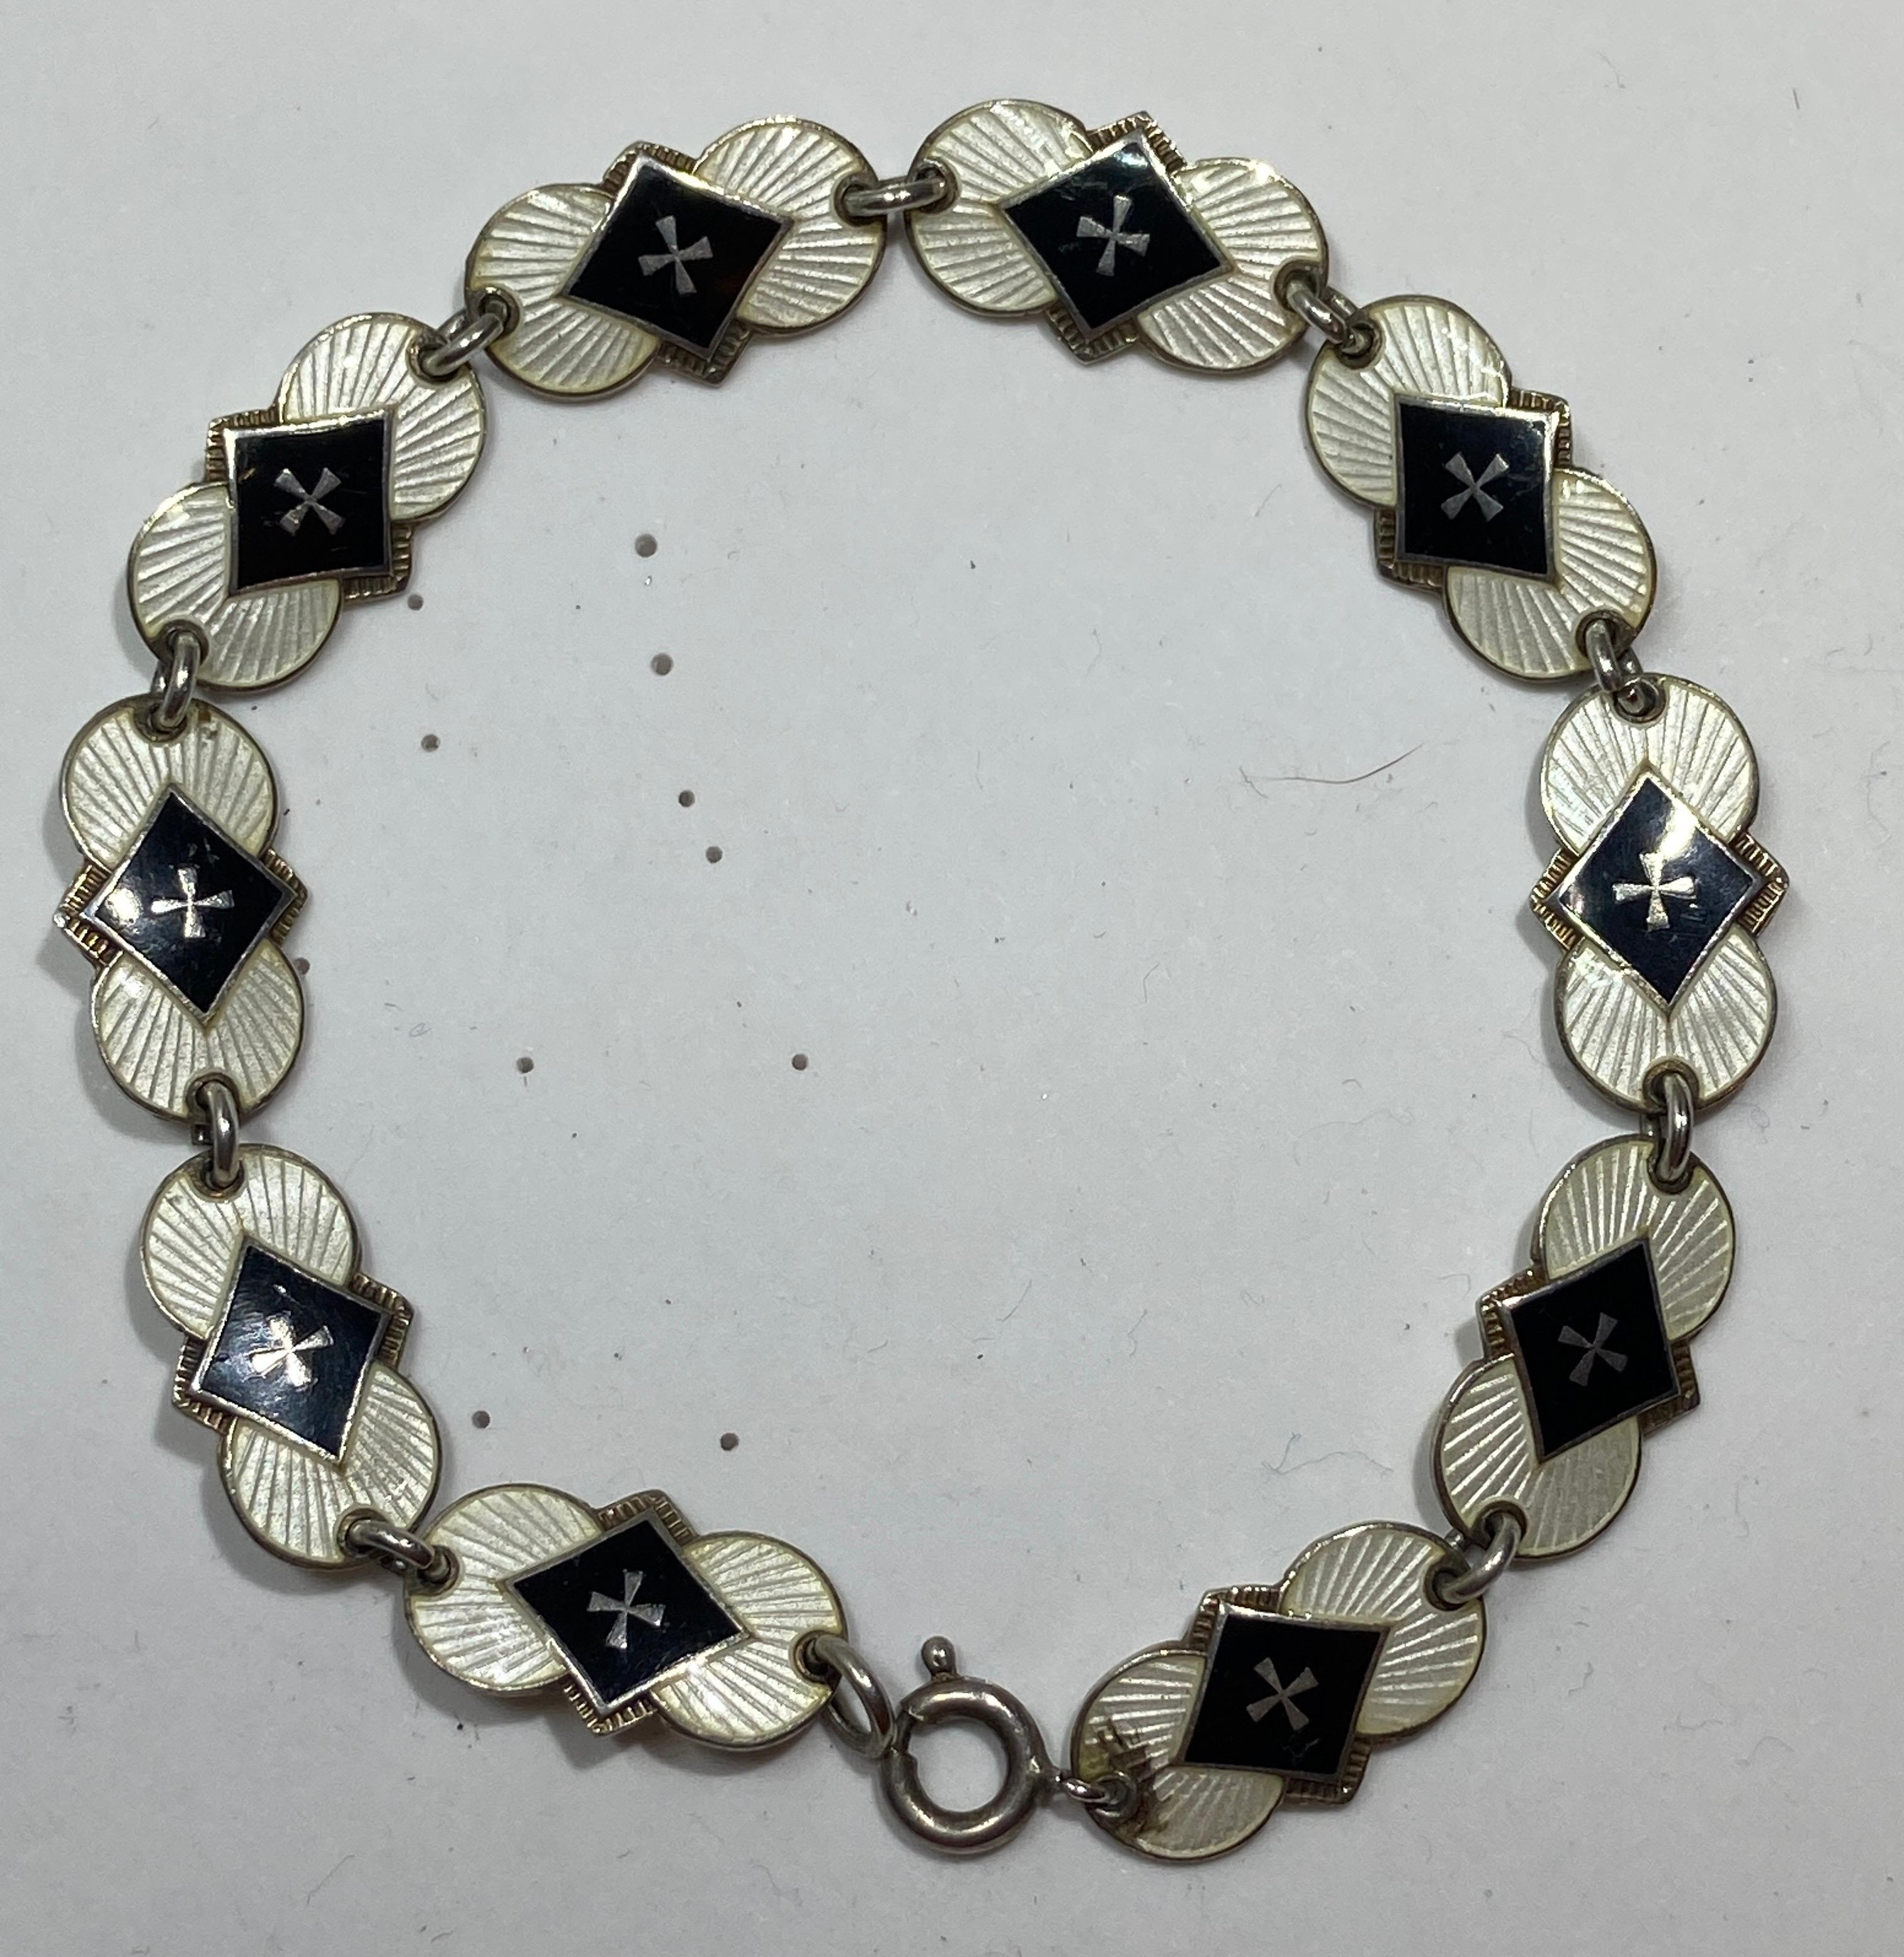 Wonderfully detailed sterling silver link bracelet with exquisite detailed black and cream baked enamel overlay. The total length measures 7 inches. width measures 3/8 of an inch. Maker's mark etched on the back. Made in England.